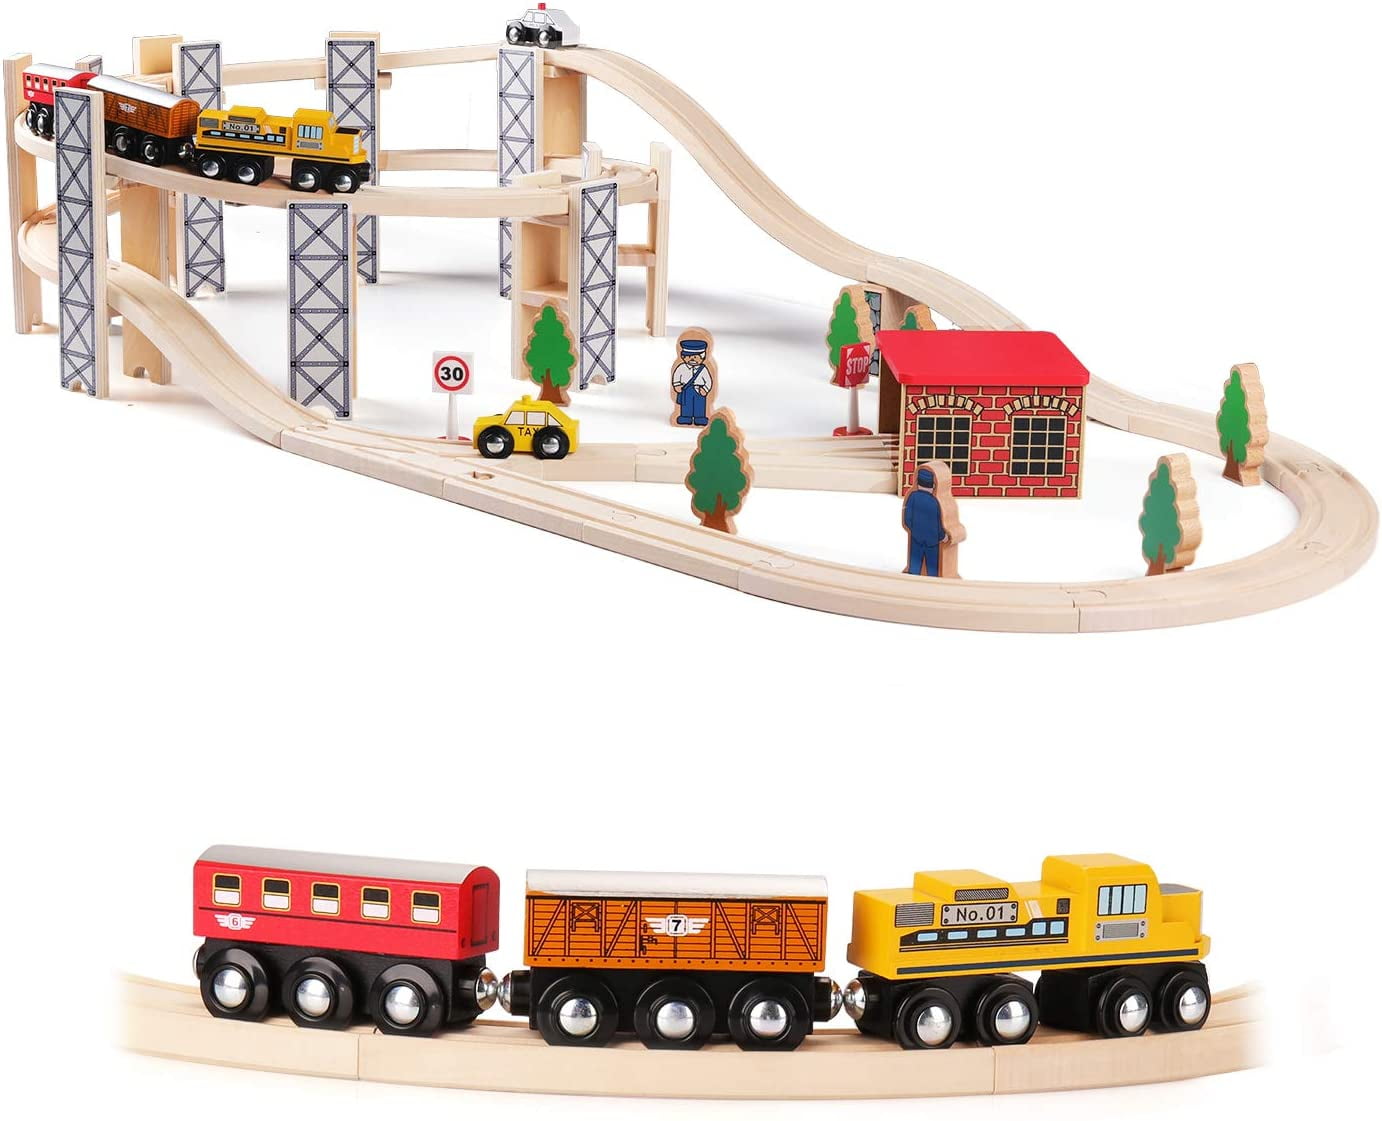 Wooden Trains Track Spiral Track City Traffic Building Kits Educational Toy 